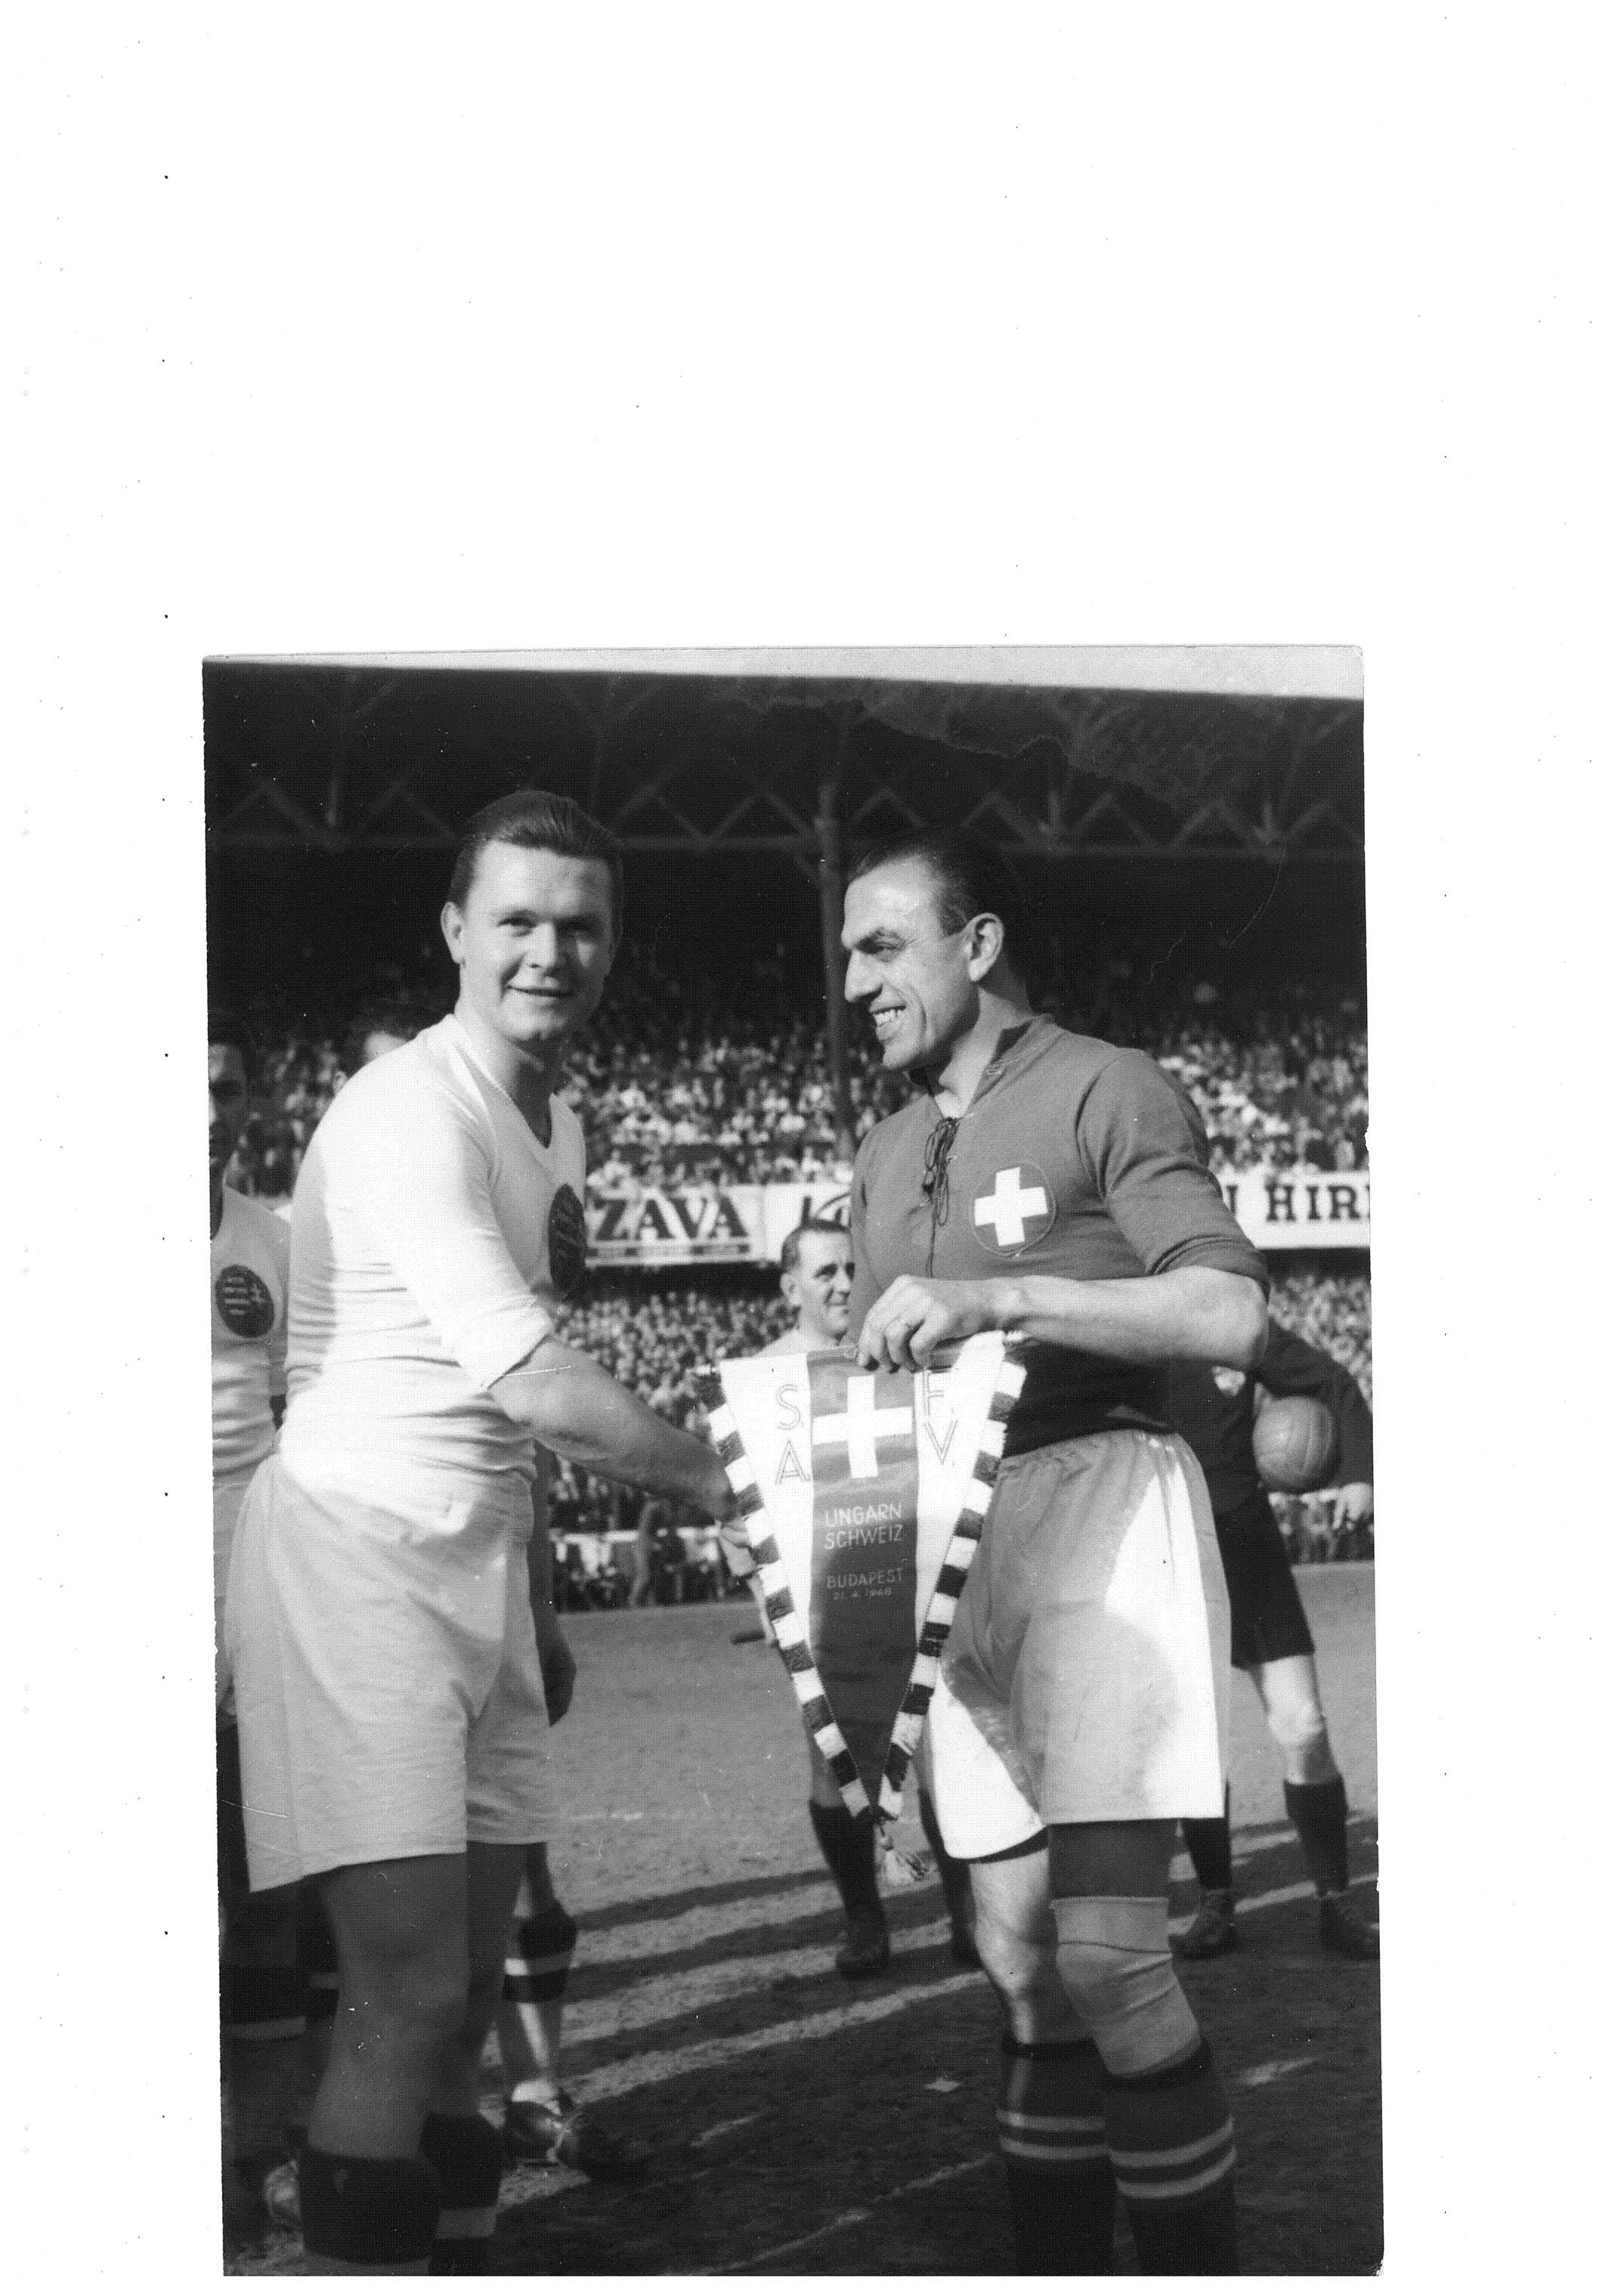 Pennants exchange before the match Hungary vs Switzerland played in 1948